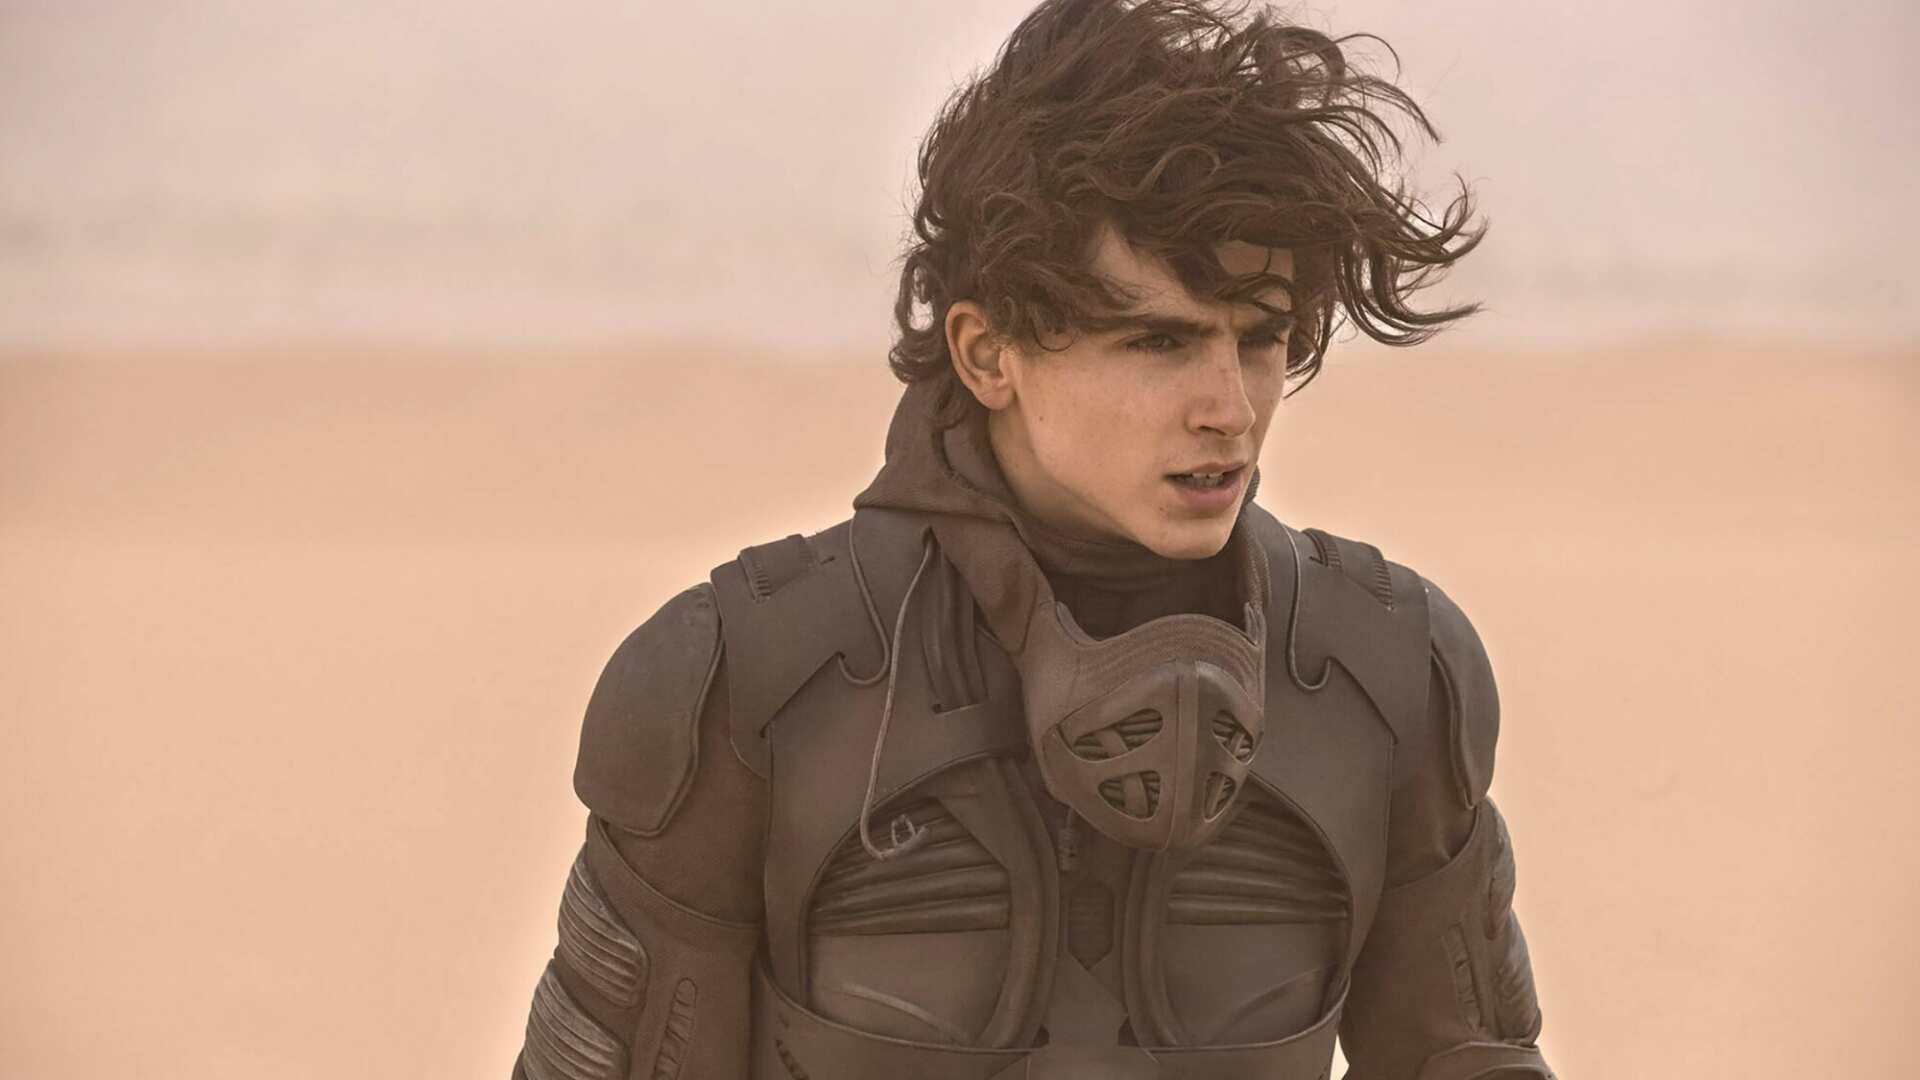 The Oscar for Best Cinematography goes to Greig Fraser for Dune